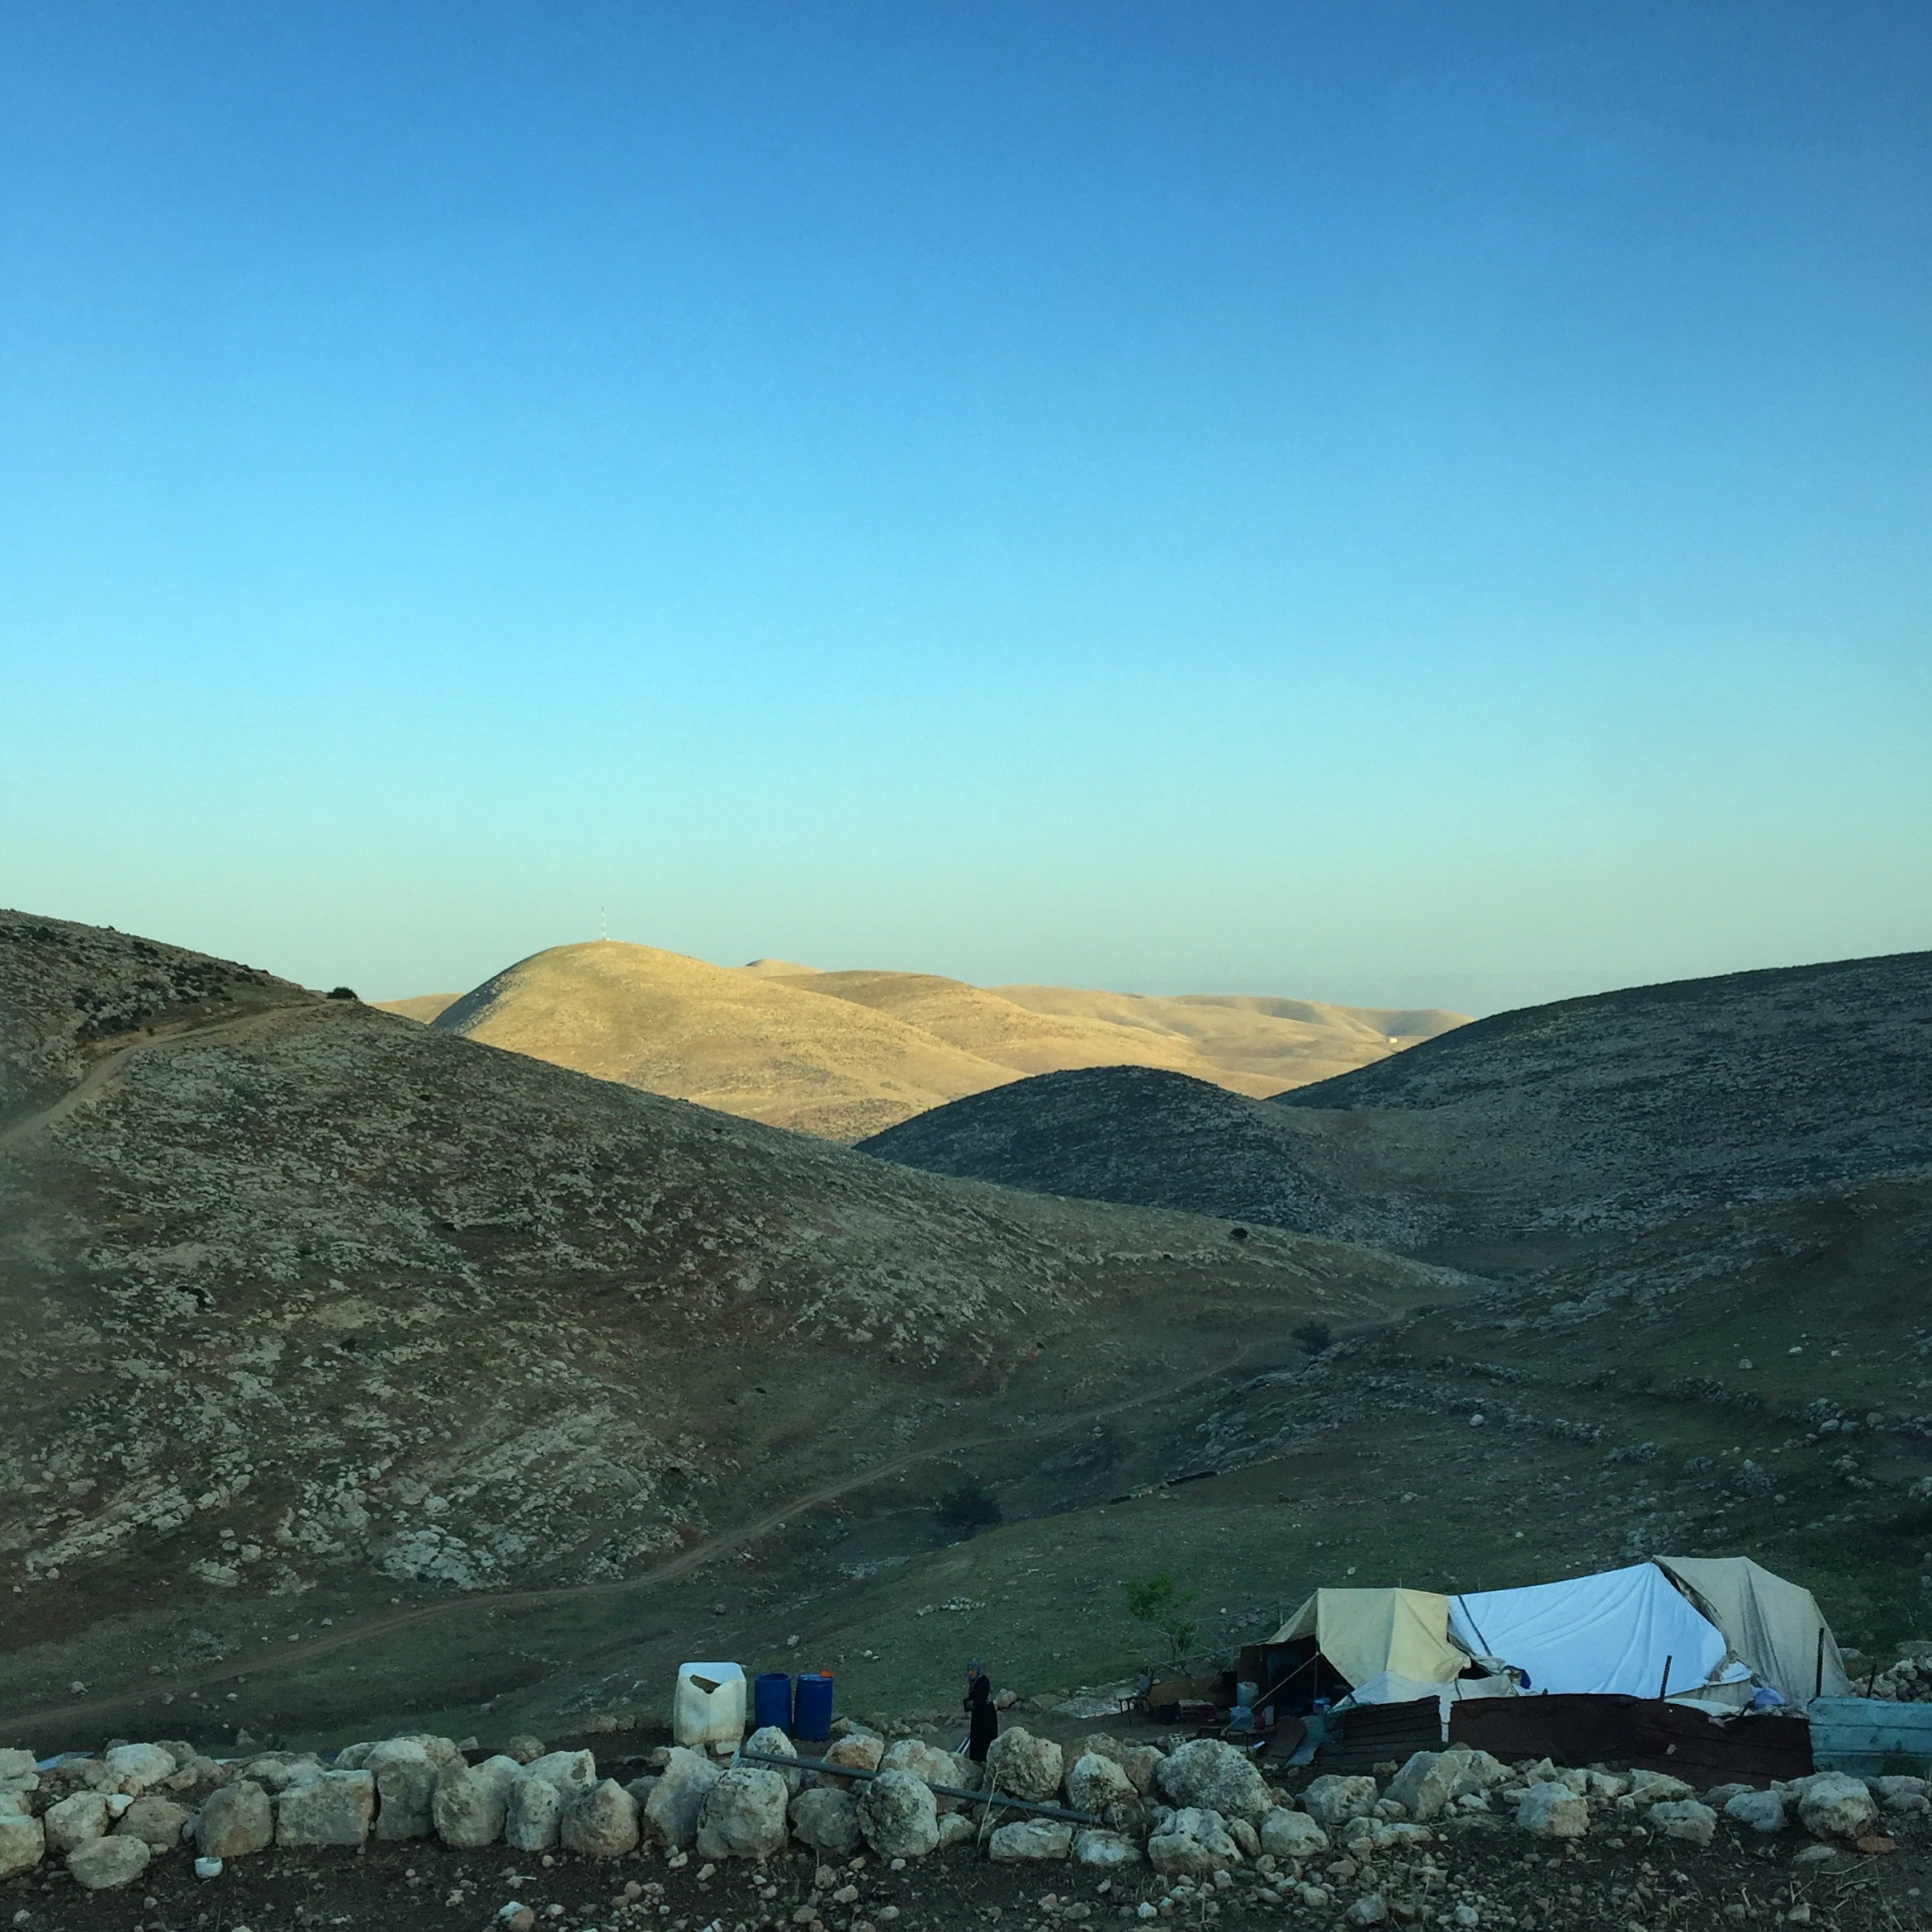  KHIRBET TANA | An improvised settlement in Khirbet Tana, where families settled after their homes were demolished by the Israeli army in February, after an Israeli court order was issued against unauthorized building in the area. This village, which